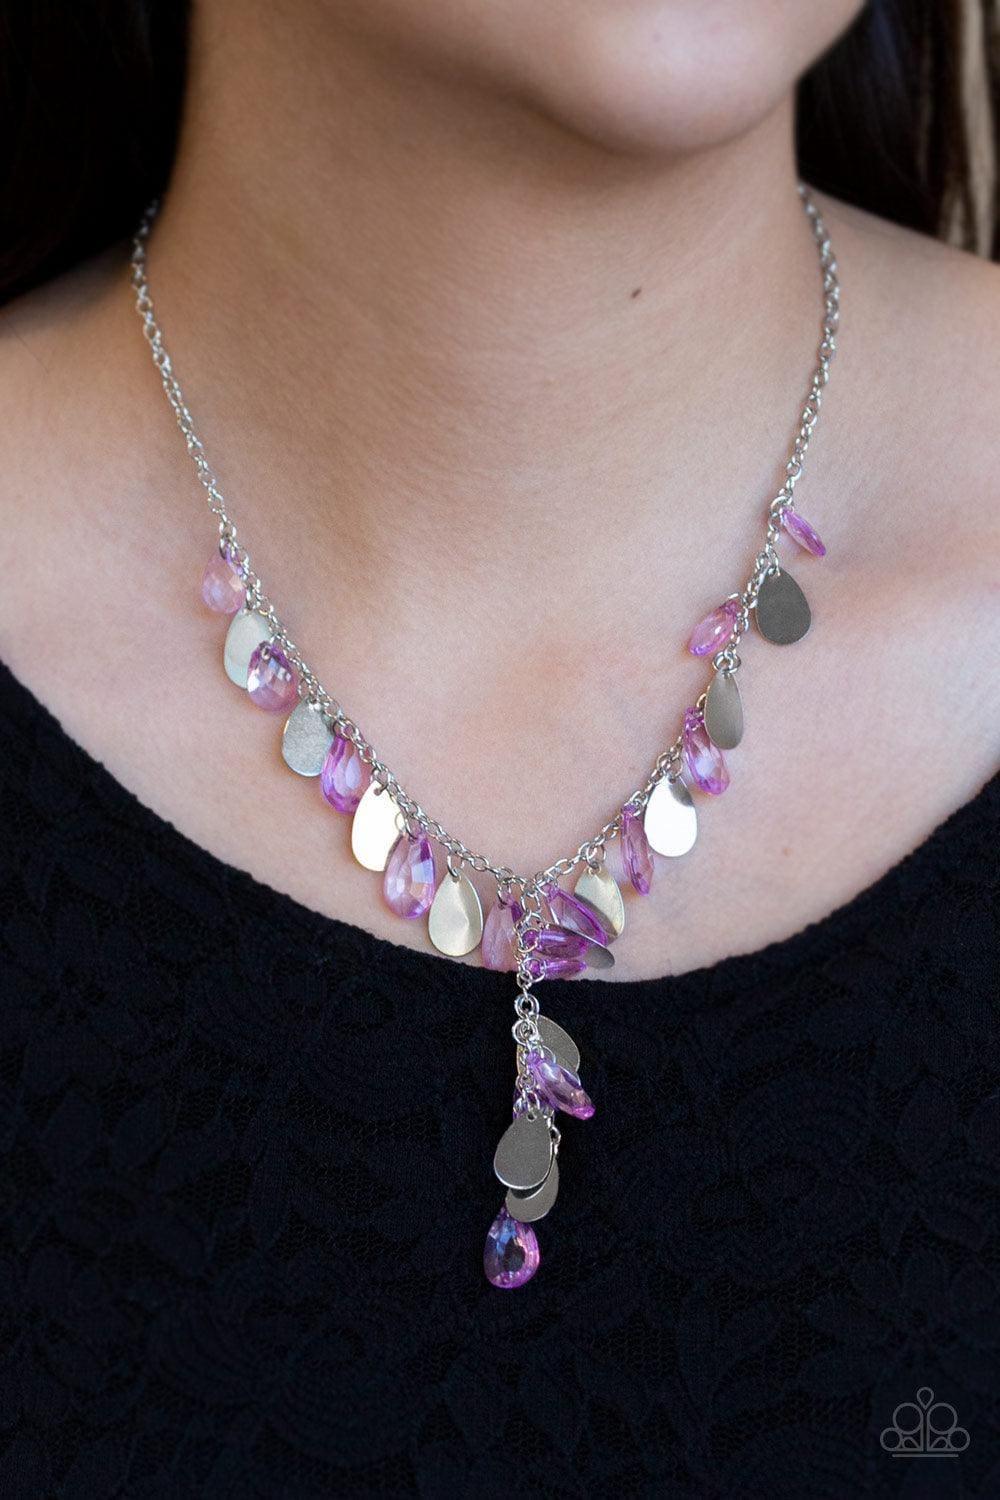 Paparazzi Accessories - Sailboat Sunsets - Purple Necklace - Bling by JessieK